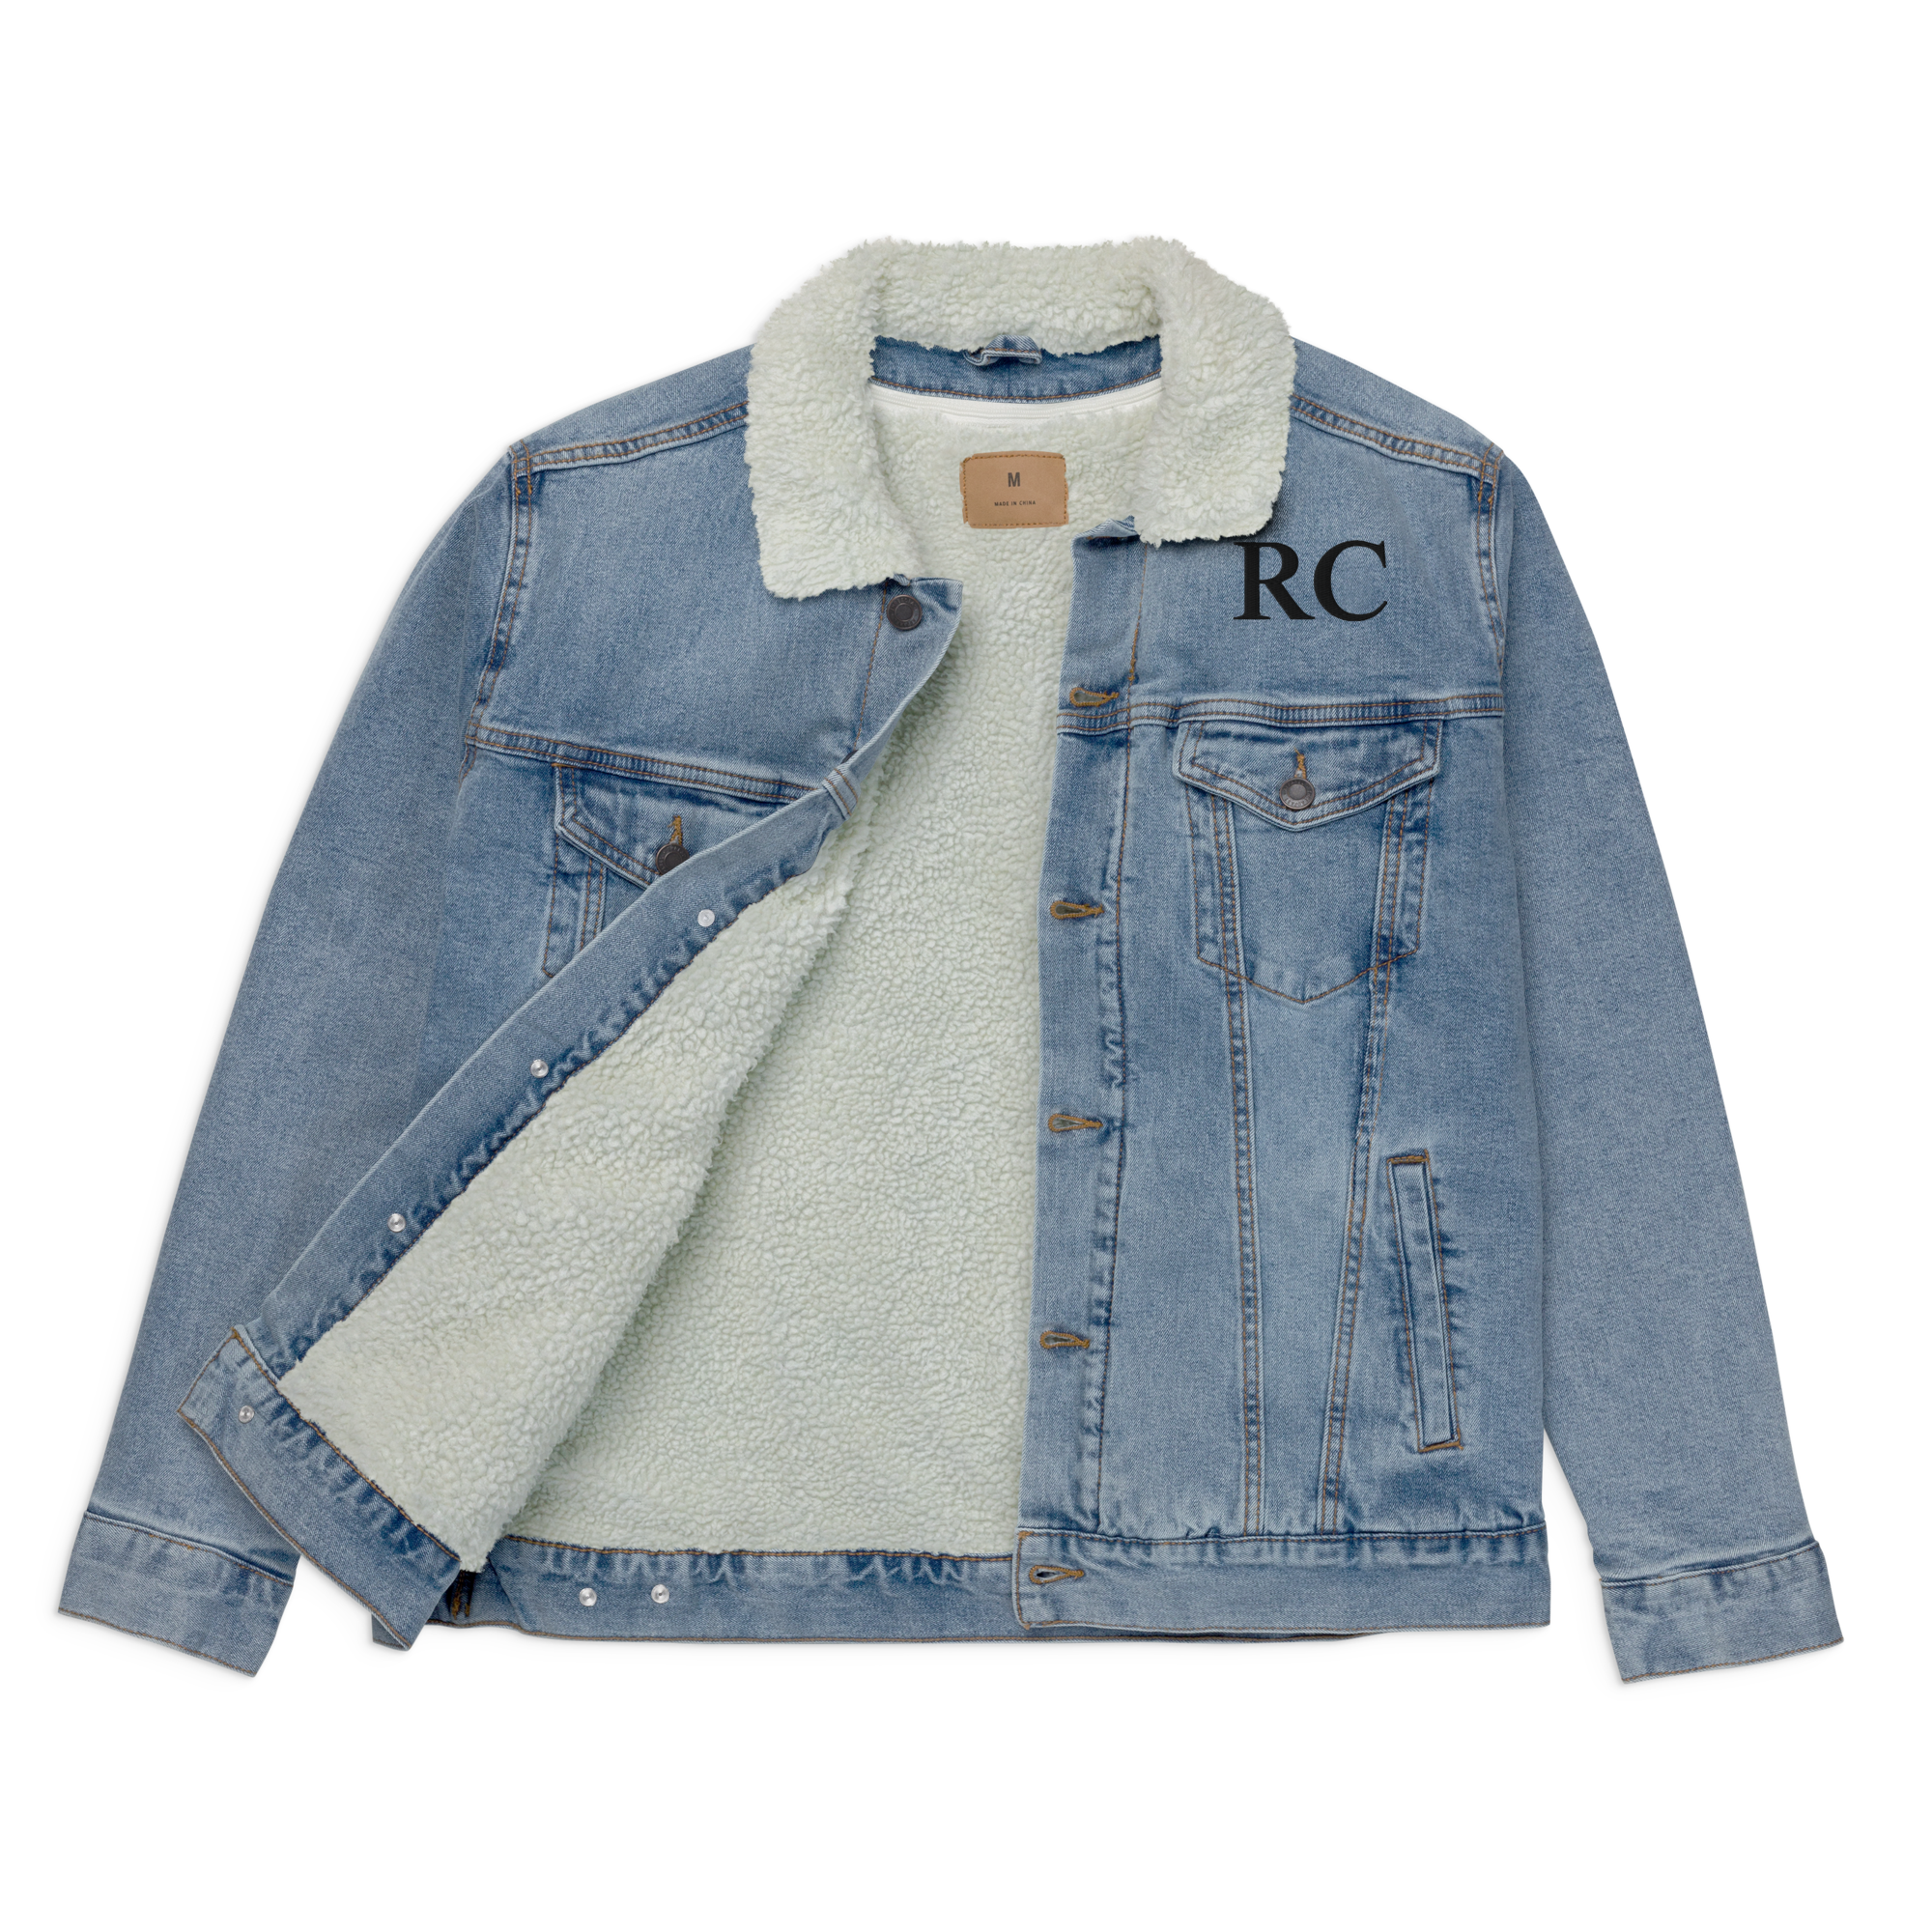 Riches Couture Luxe Denim Sherpa Jacket